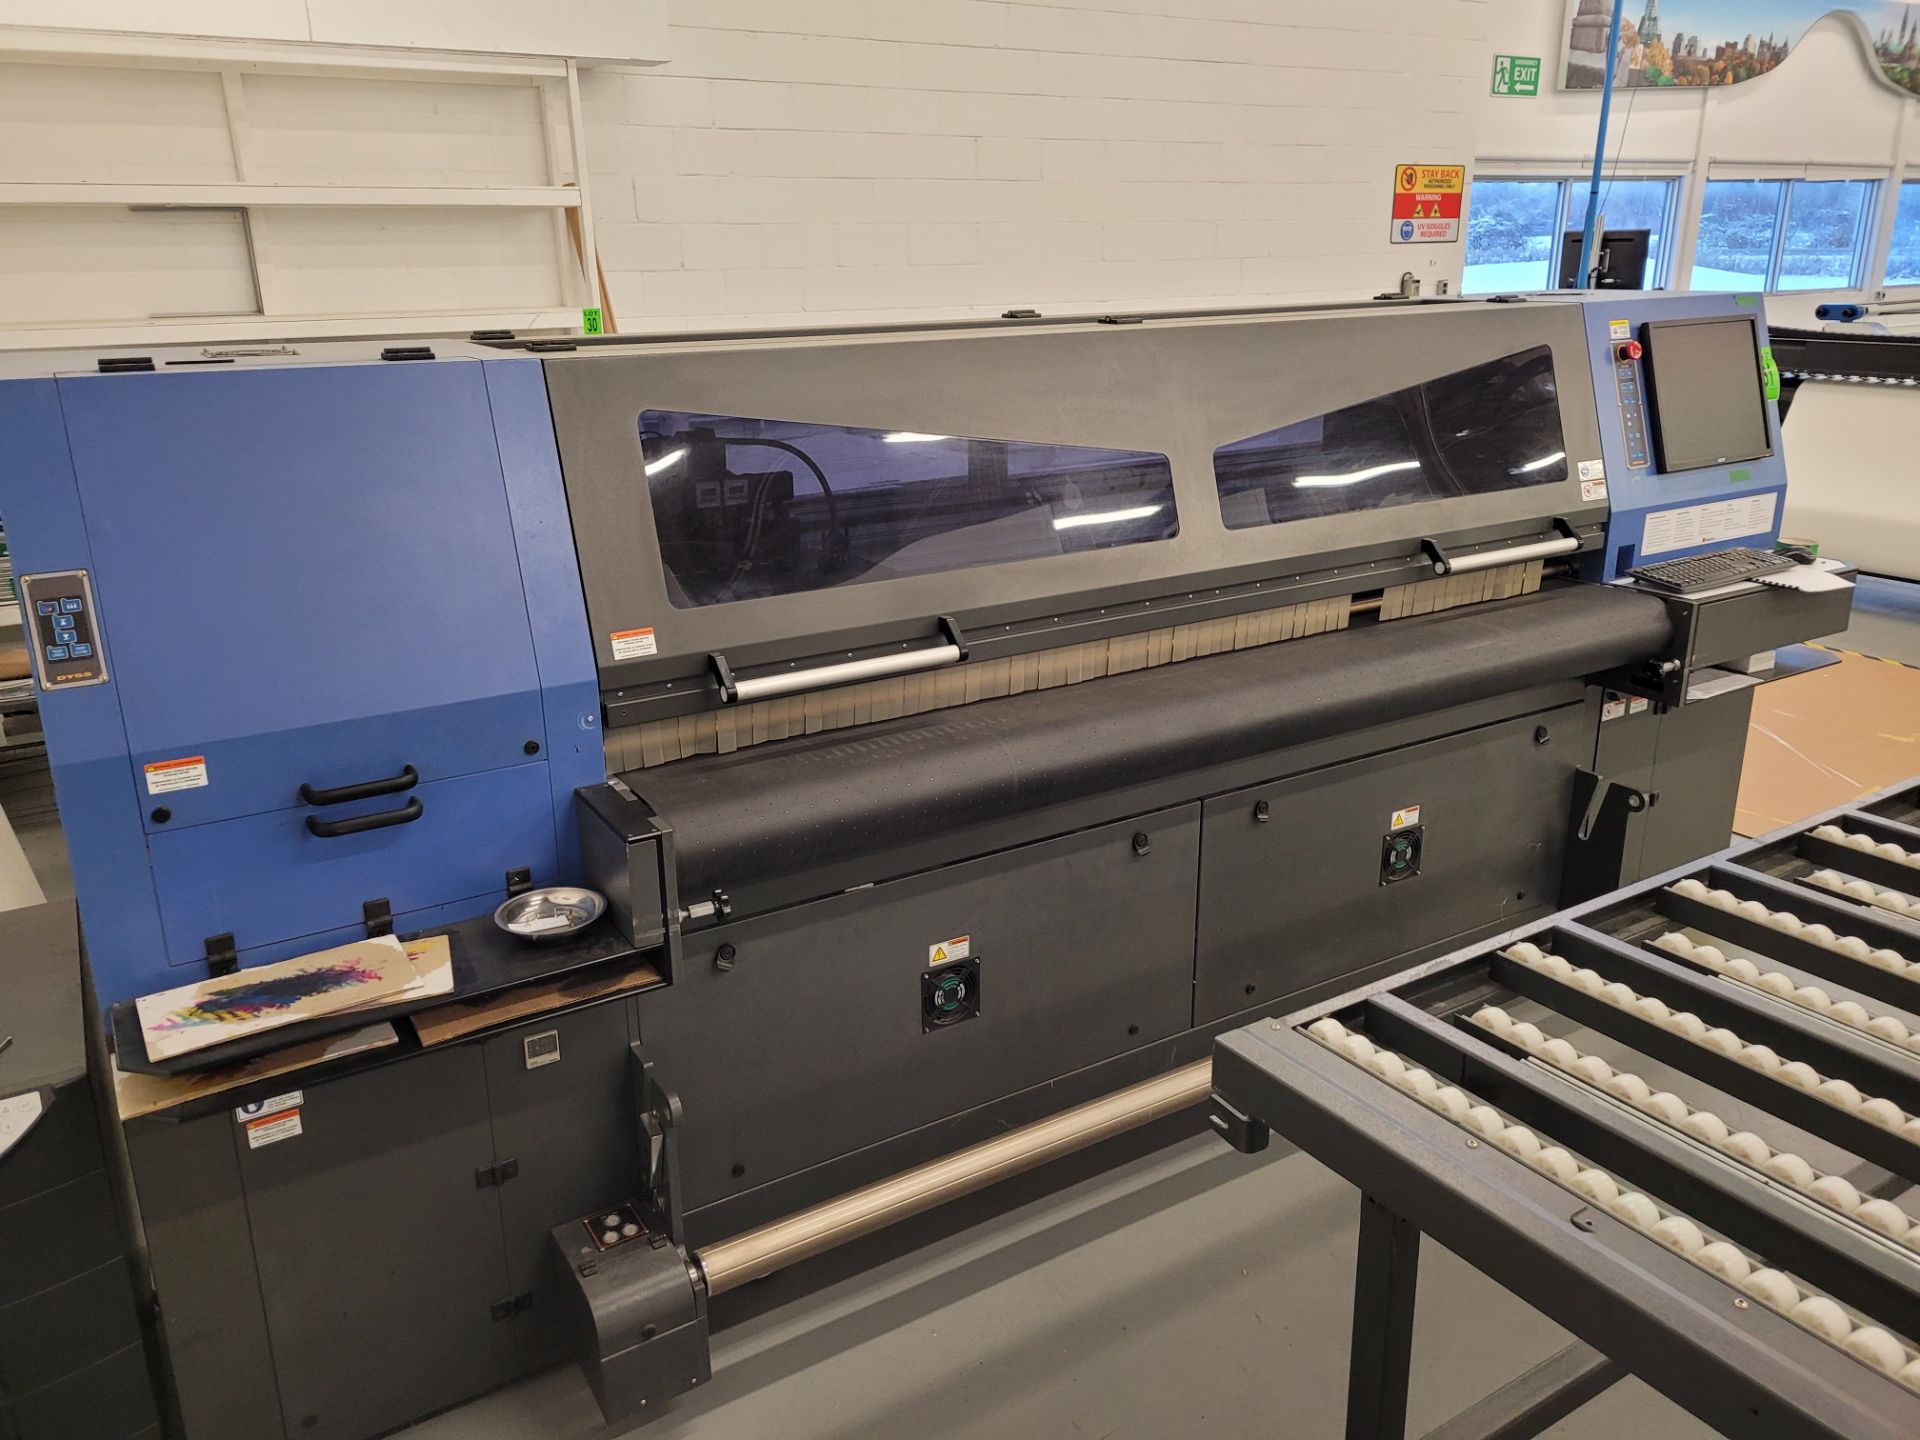 DYSS UV Printing Machine mod. Lasco & Apollo, ser. 221674RR000100264, 220V, includes conveyors and - Image 36 of 37